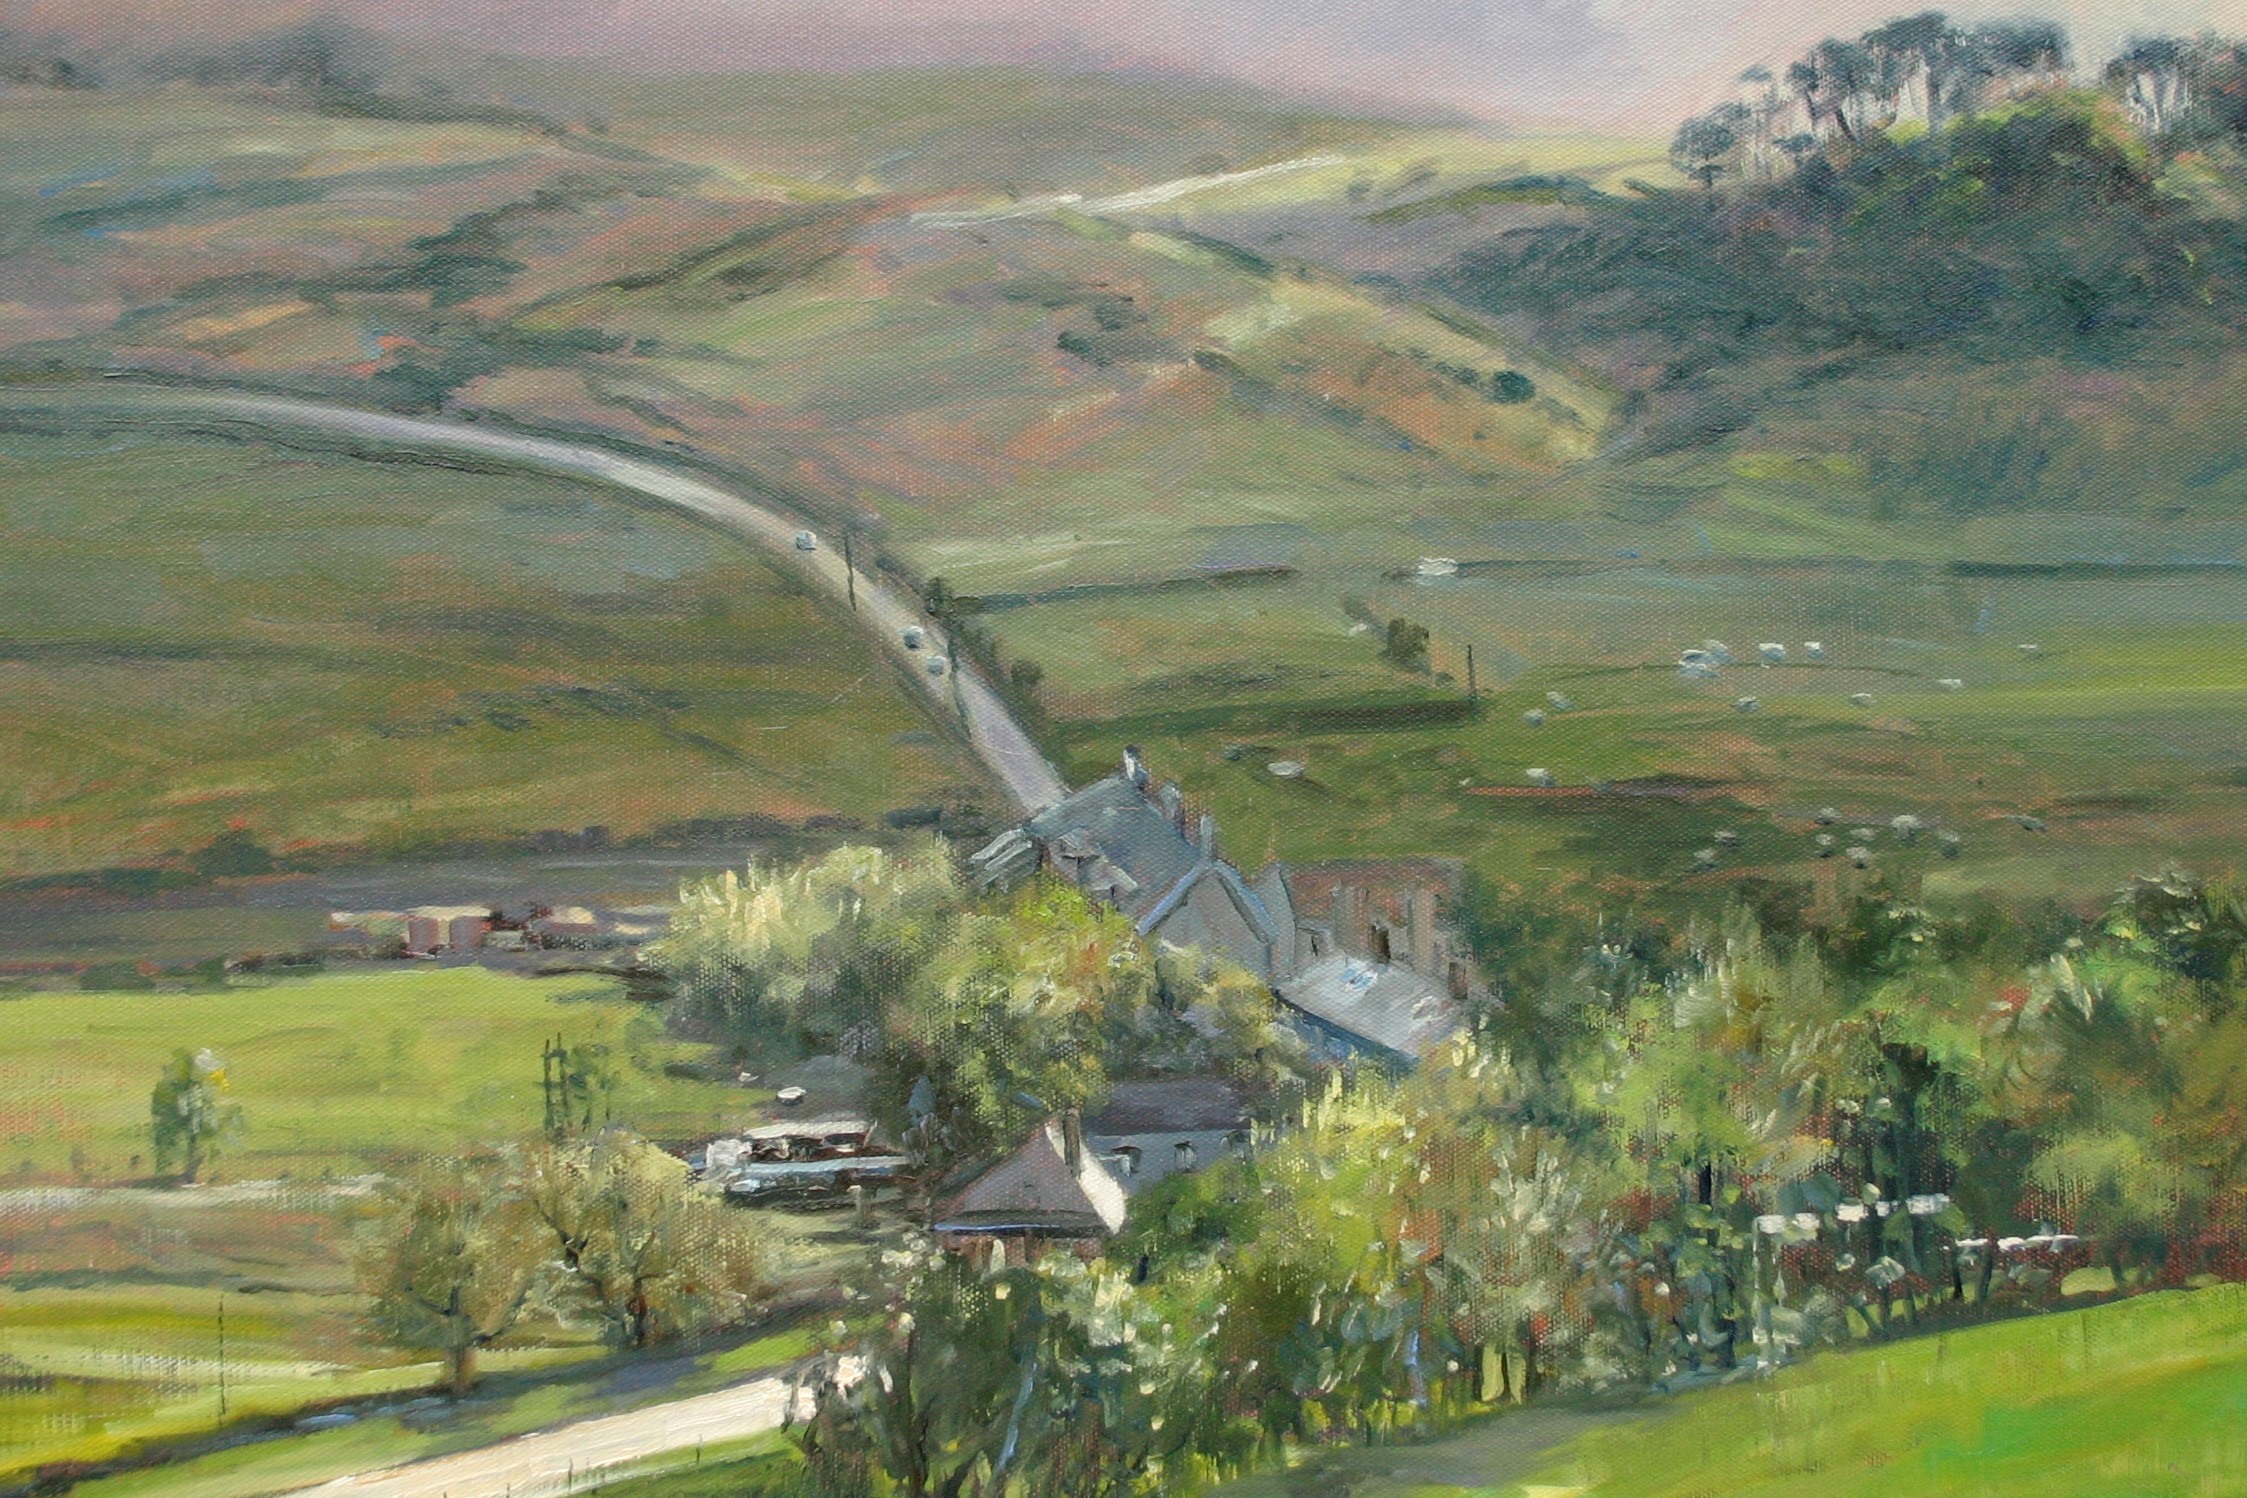 Painting of a landscape with fields and hills